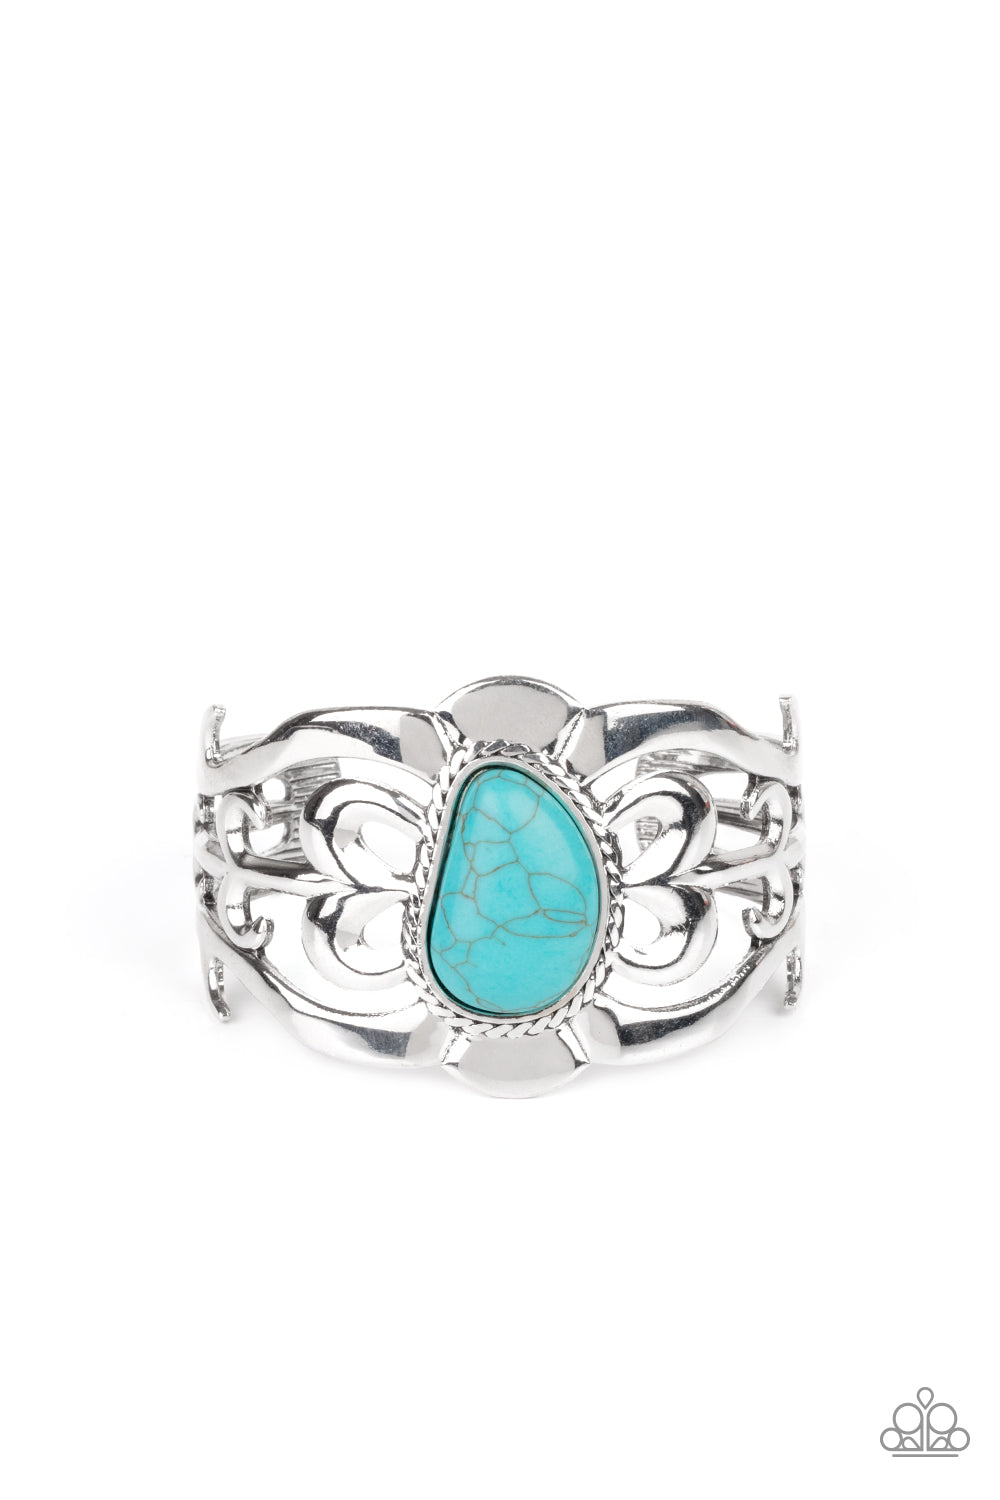 An asymmetrical turquoise stone is pressed into the center of a silver cuff layered with filigree patterns around the wrist for a rustic flair.